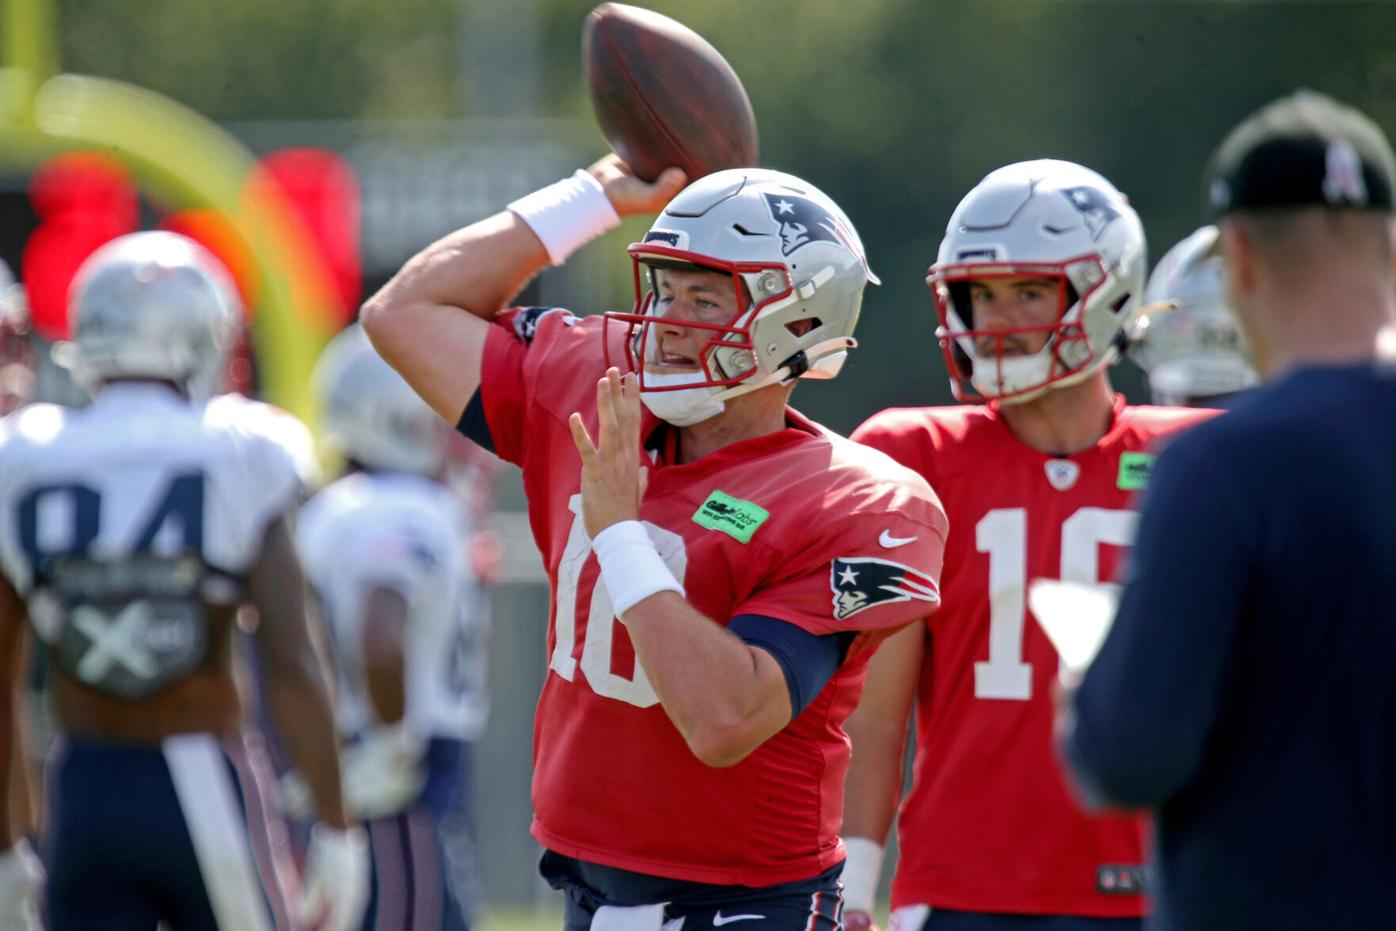 Jones starts for Patriots but quickly gives way to Zappe